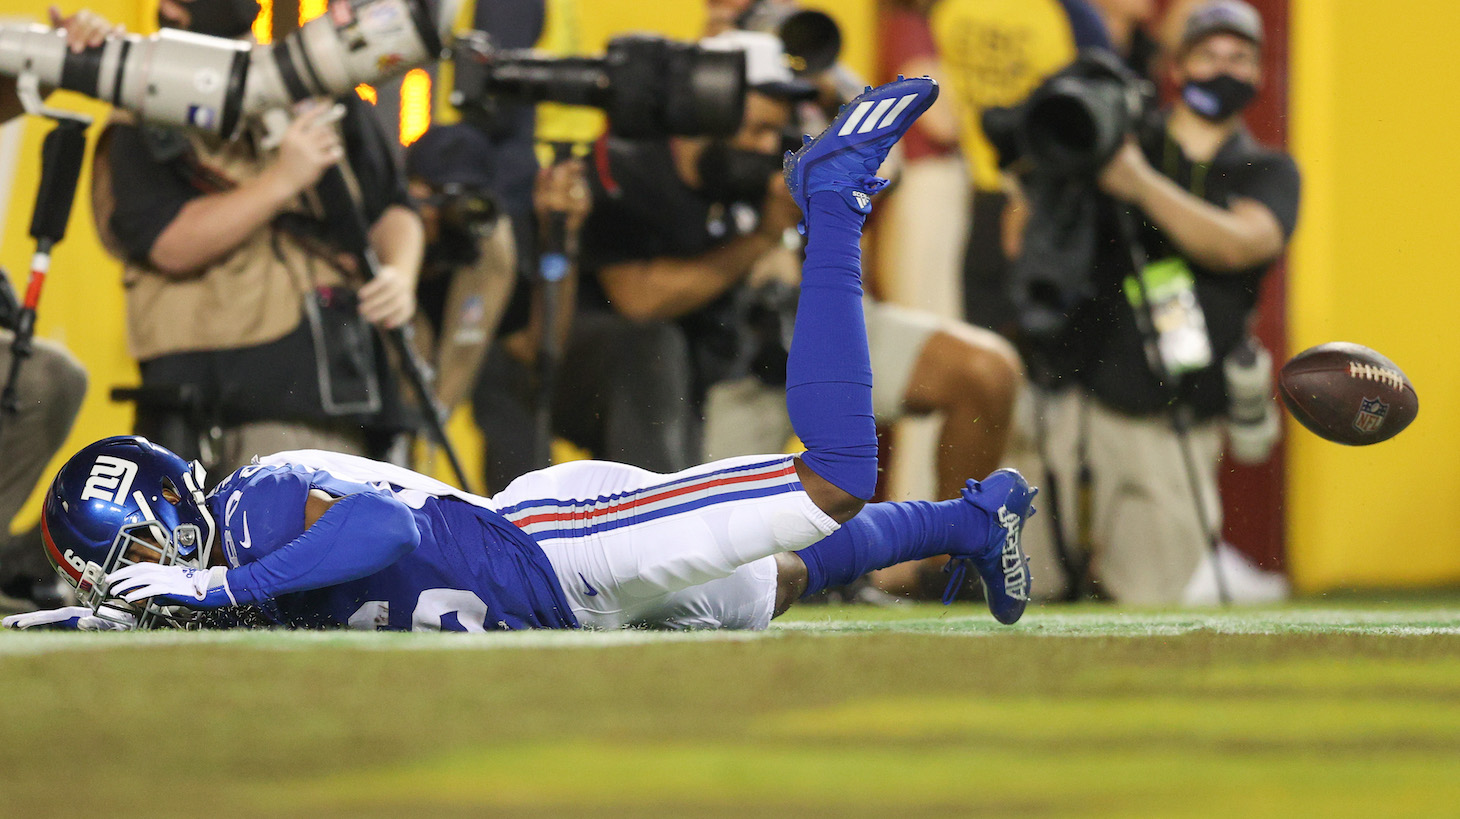 LANDOVER, MARYLAND - SEPTEMBER 16: Darius Slayton #86 of the New York Giants unable to make a reception in the endzone late in the fourth quarter against the Washington Football Team at FedExField on September 16, 2021 in Landover, Maryland. (Photo by Patrick Smith/Getty Images)